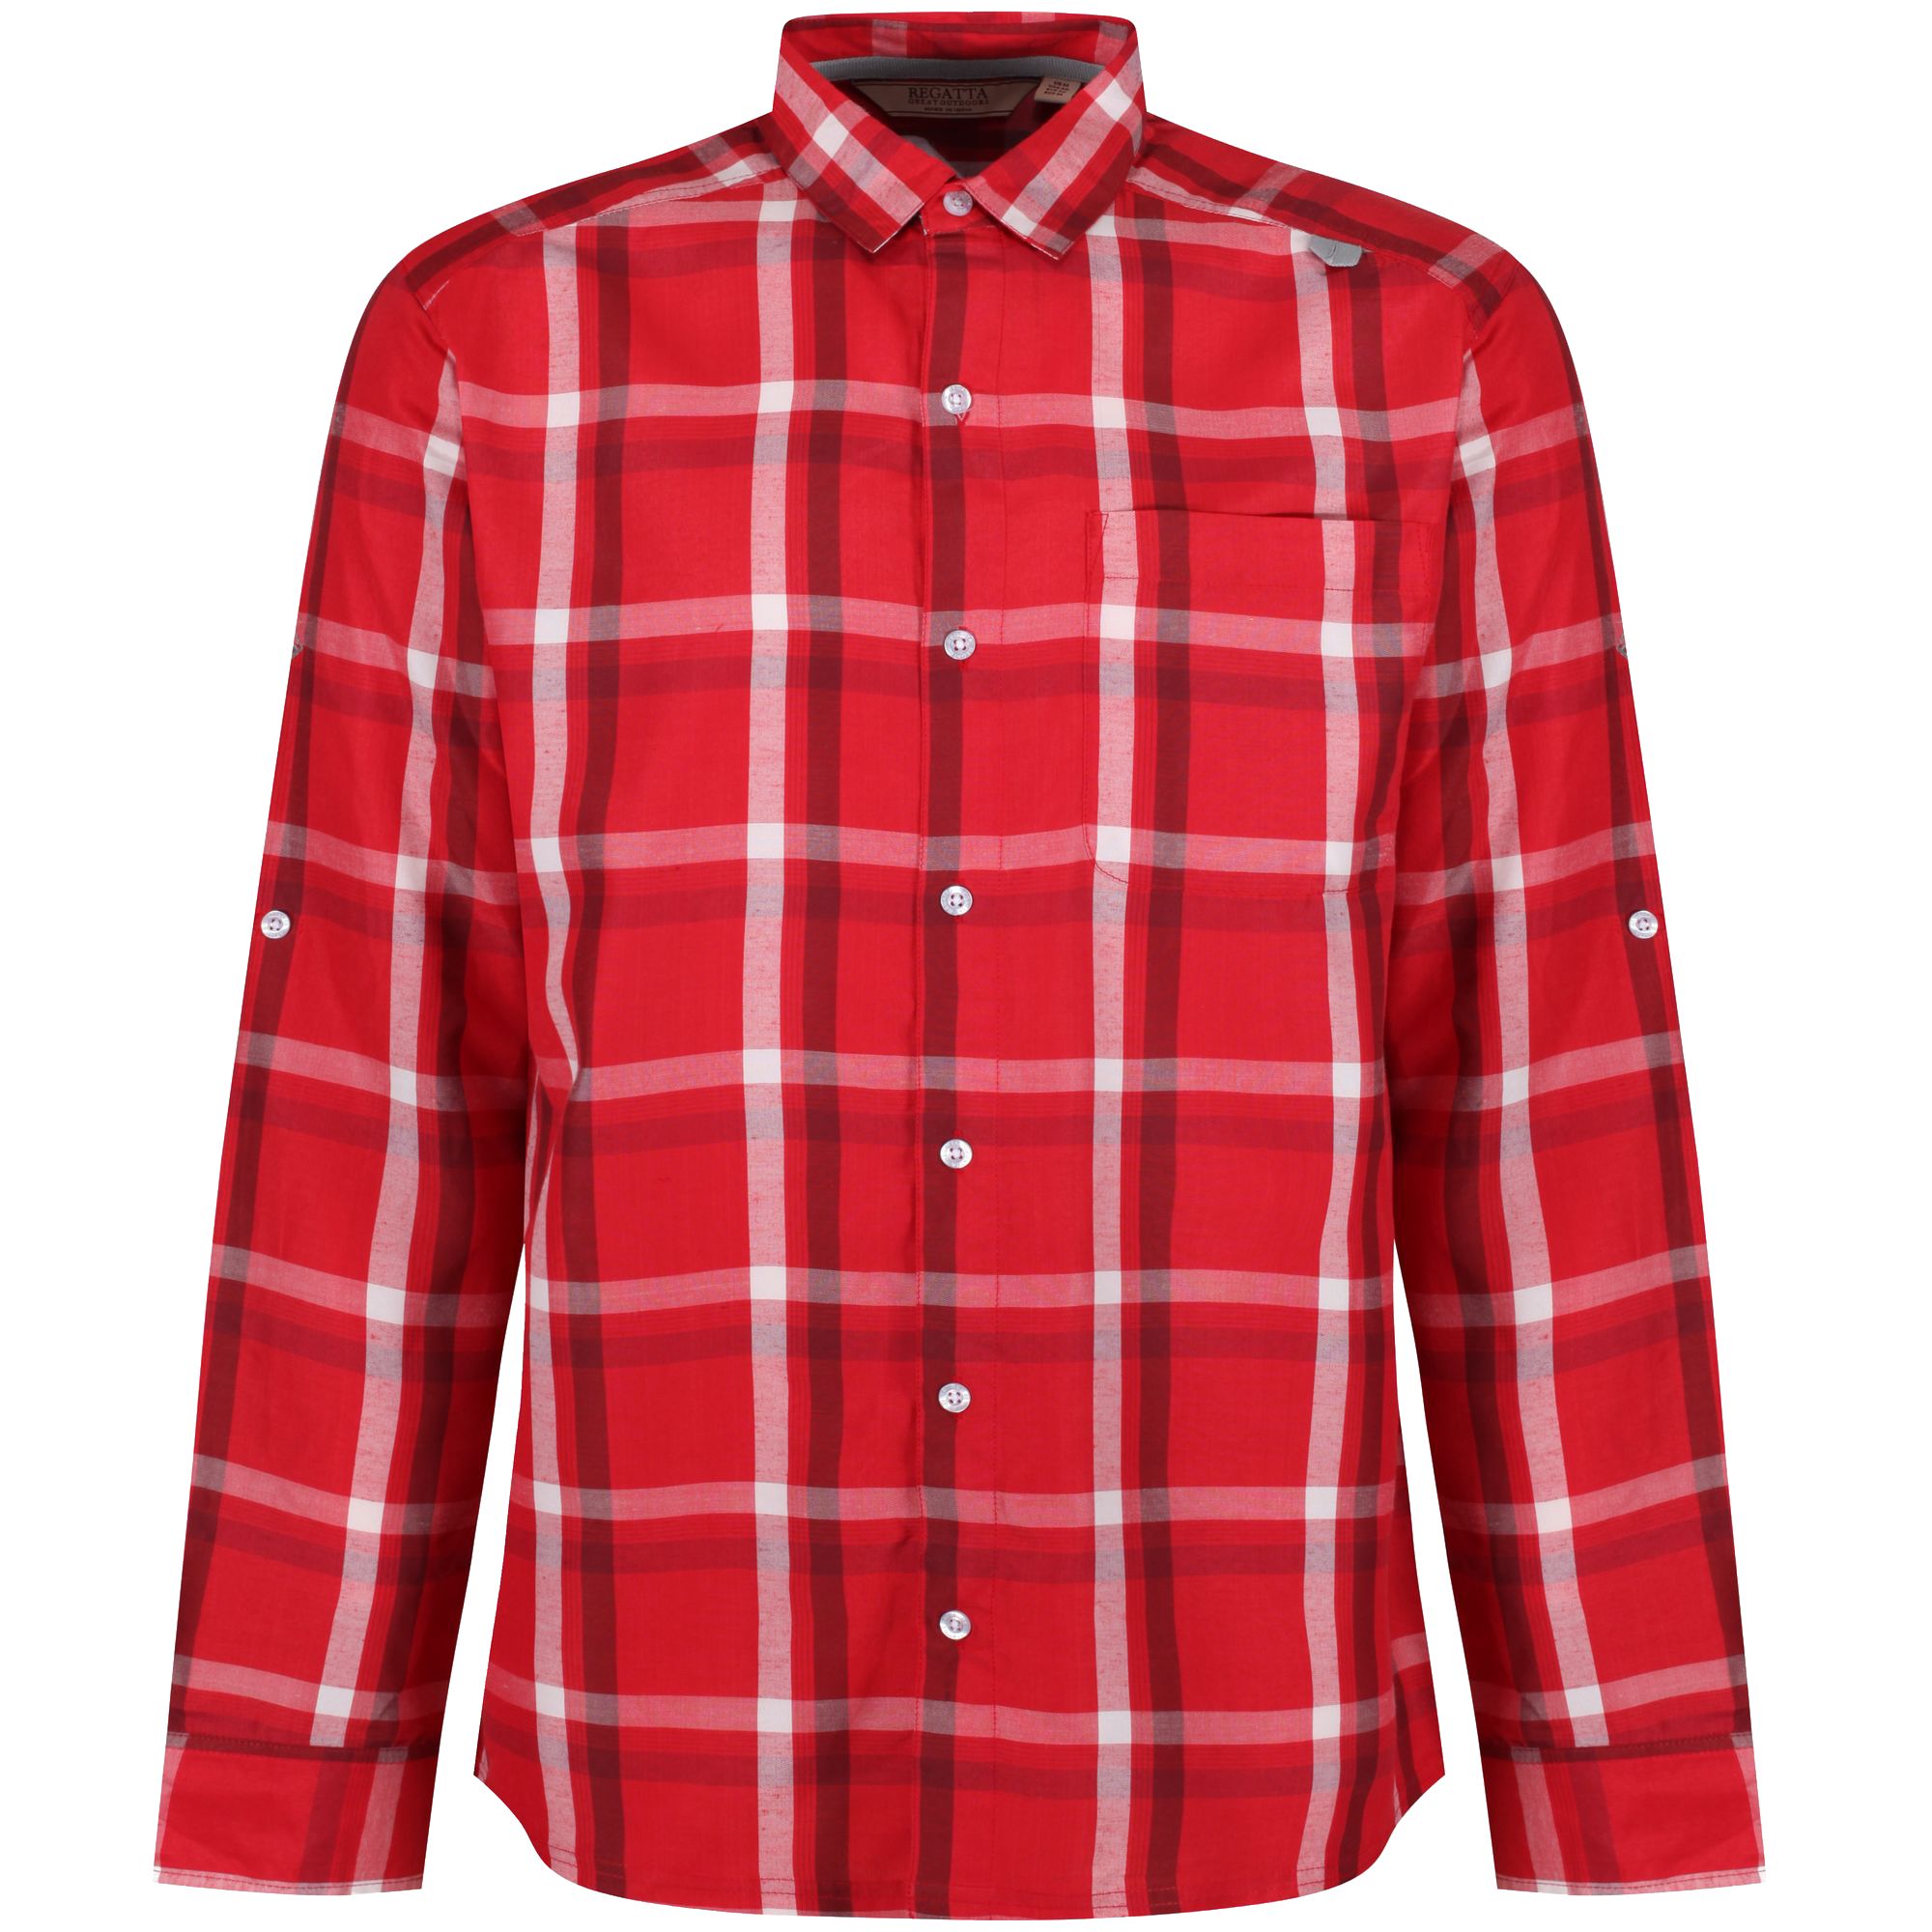 97% Polyester, 3% Viscose/rayon. Long sleeve checked shirt. Good wicking performance. Quick drying. 1 chest pocket. Turn up cuffs with button fastening.